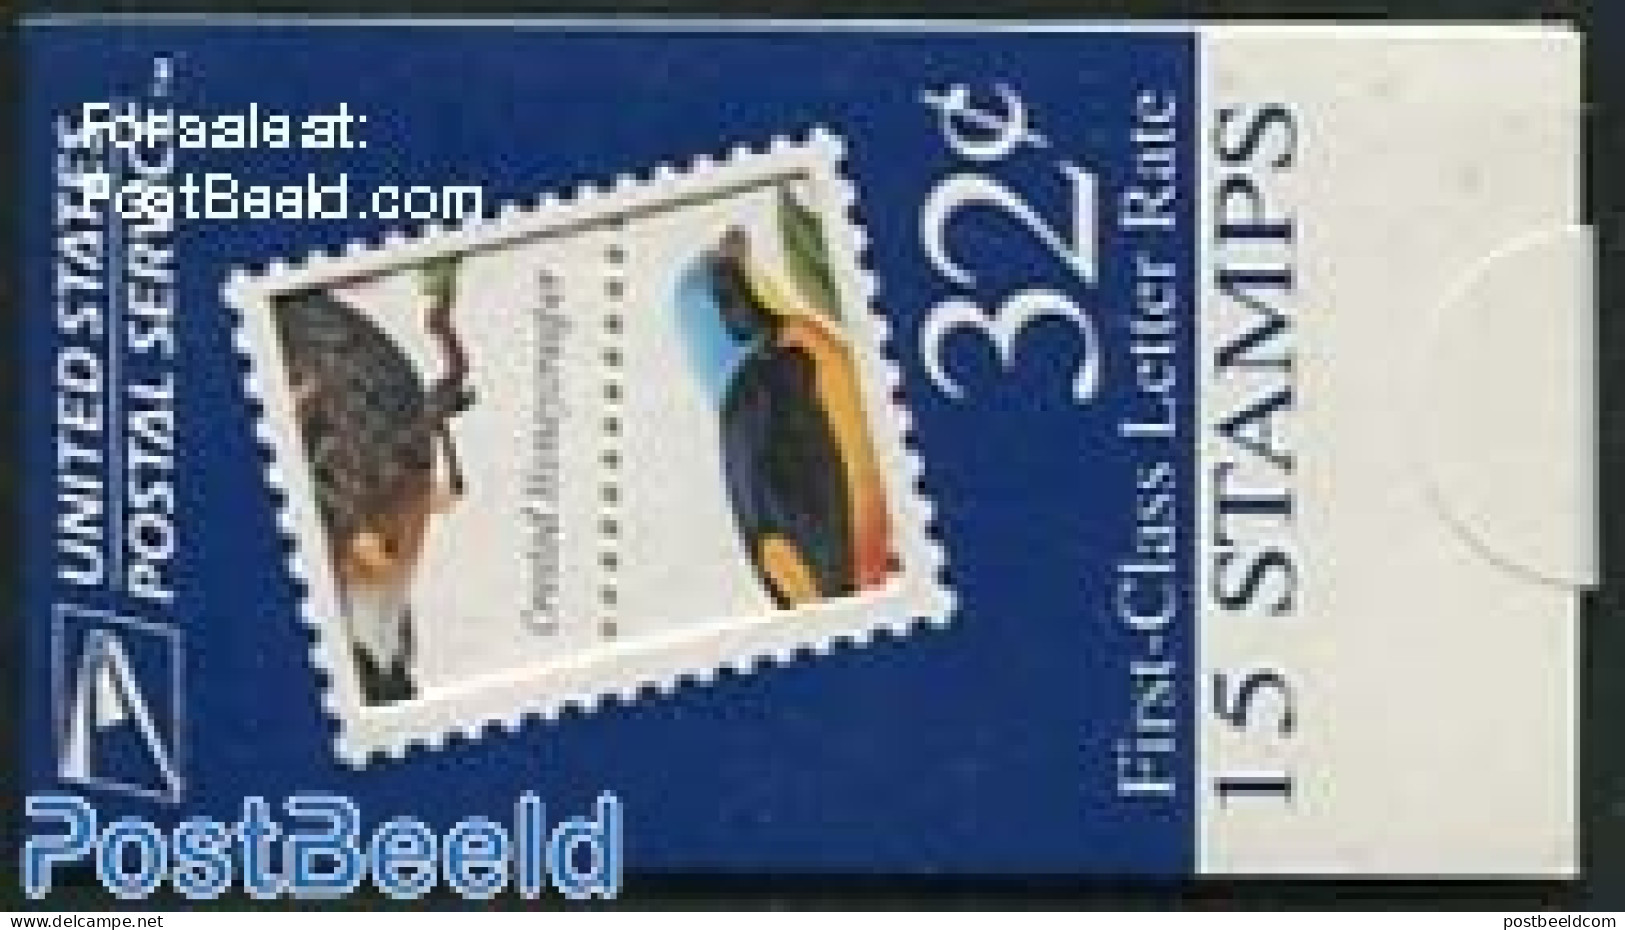 United States Of America 1998 Birds Booklet, Mint NH, Nature - Birds - Stamp Booklets - Nuevos